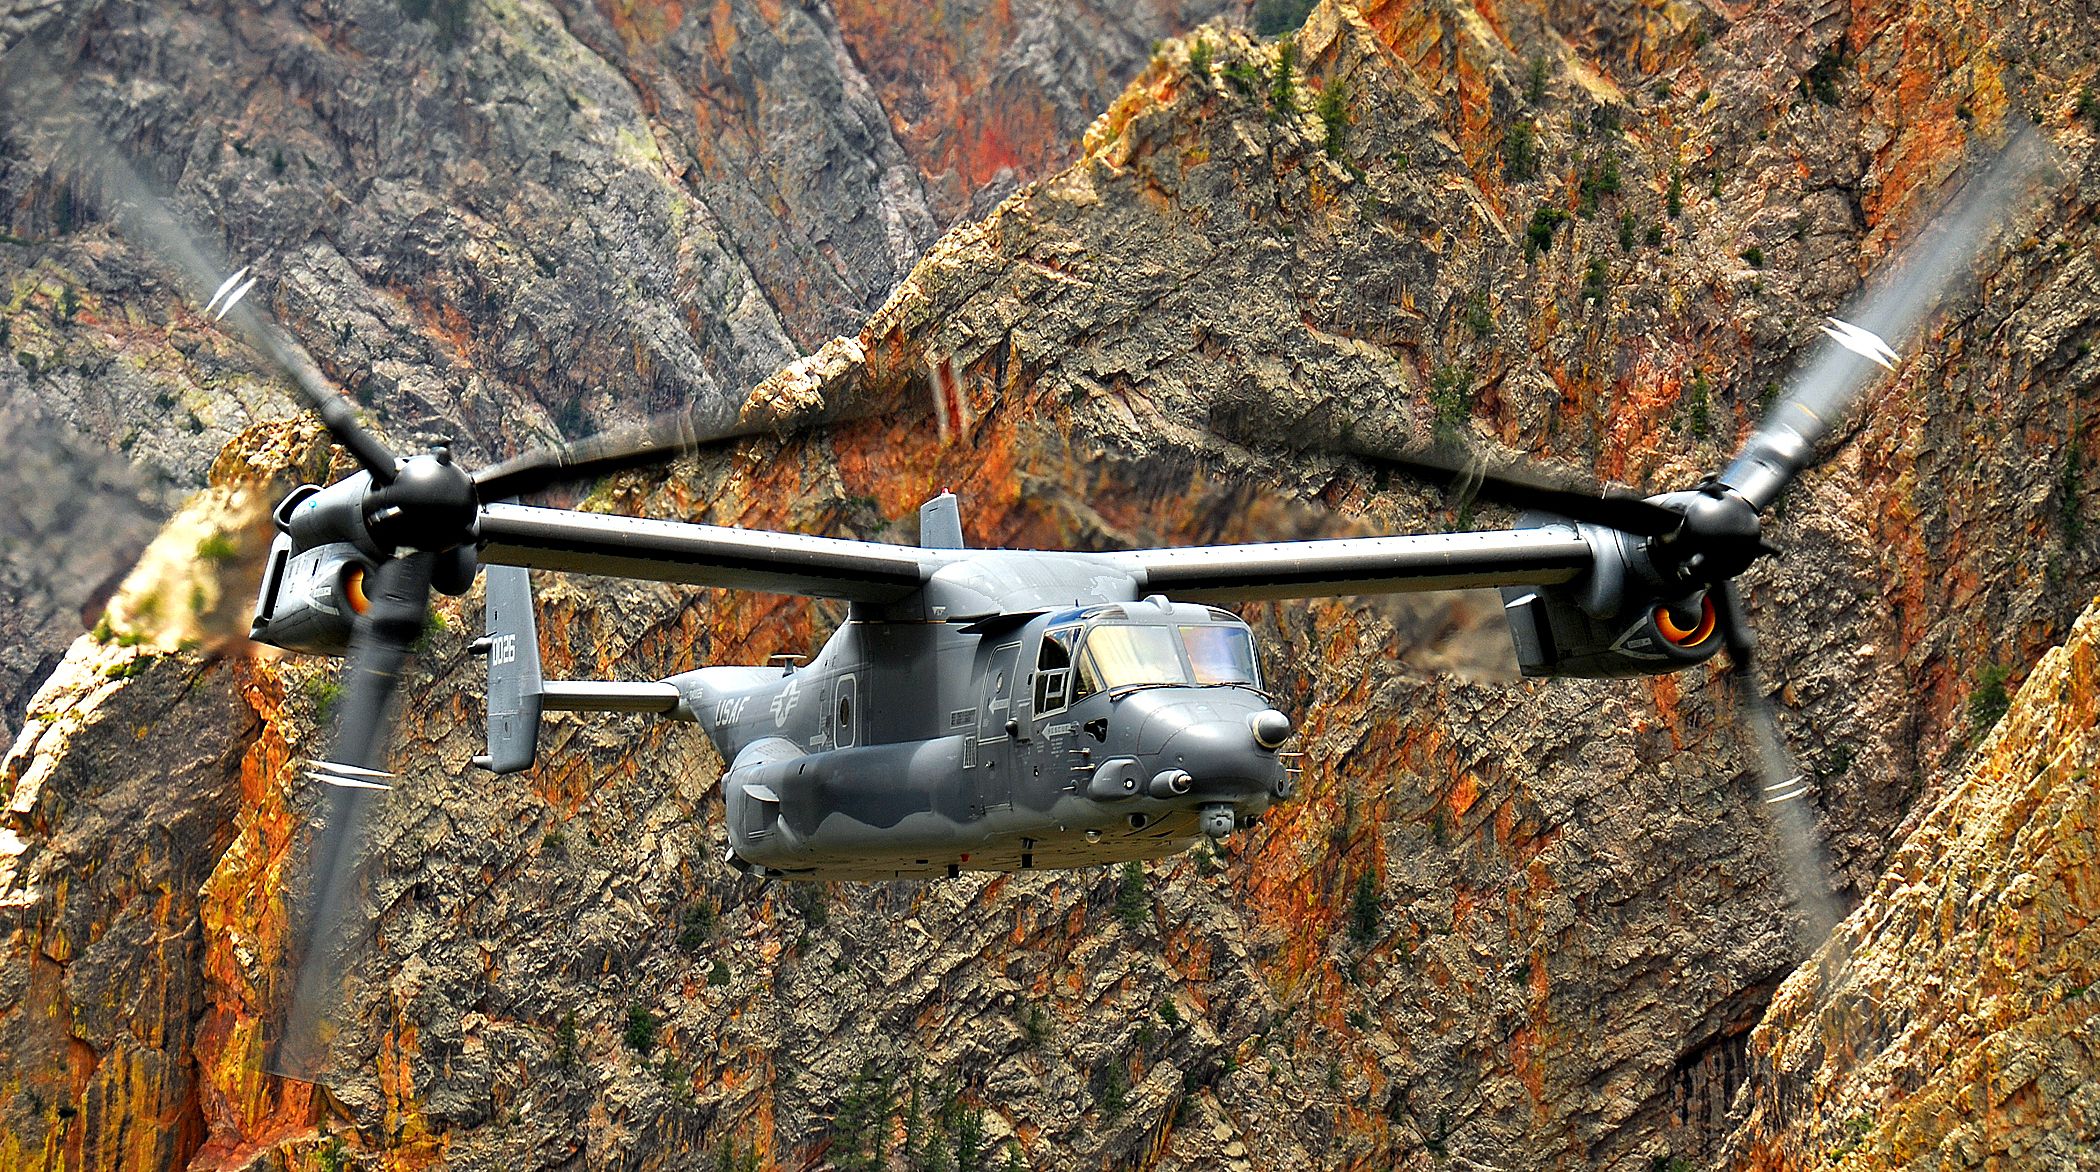 Daily Wallpaper: Osprey V22 Caught In Action. I Like To Waste My Time